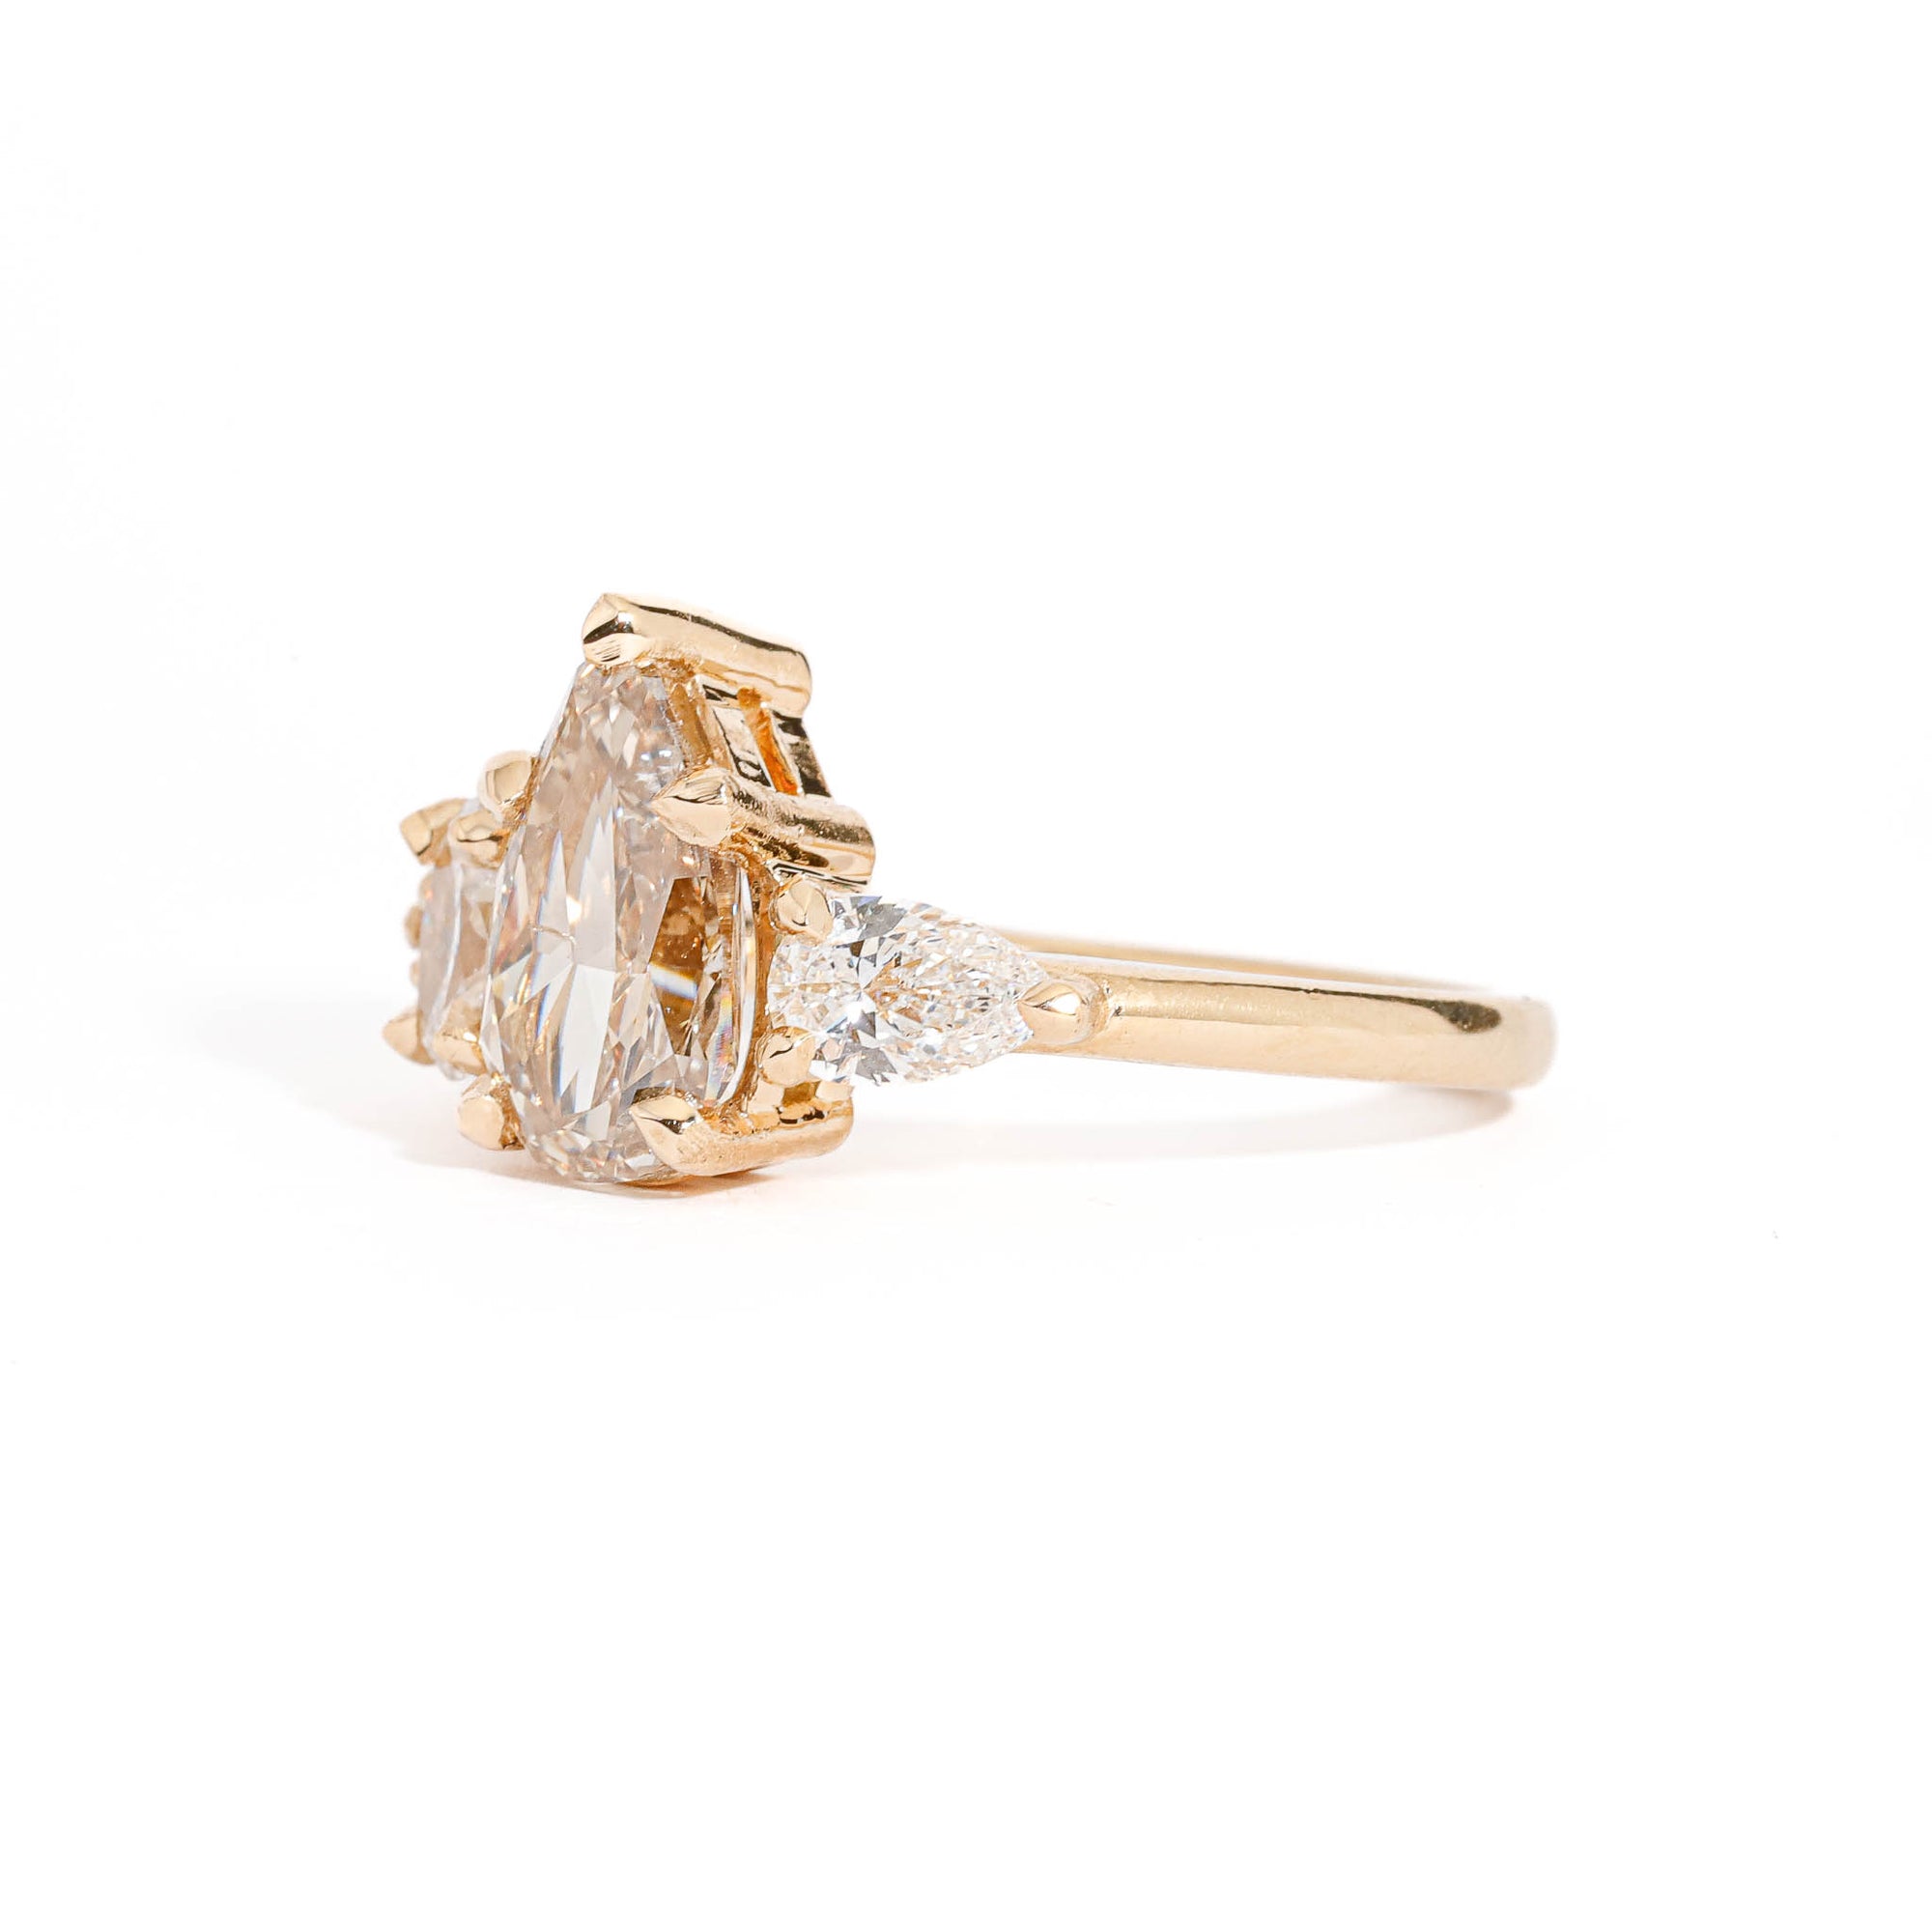 Pear Cut Champagne Diamond with Pear and Round Brilliant Cut White Diamond Side Stones in 18 Carat Yellow Gold 